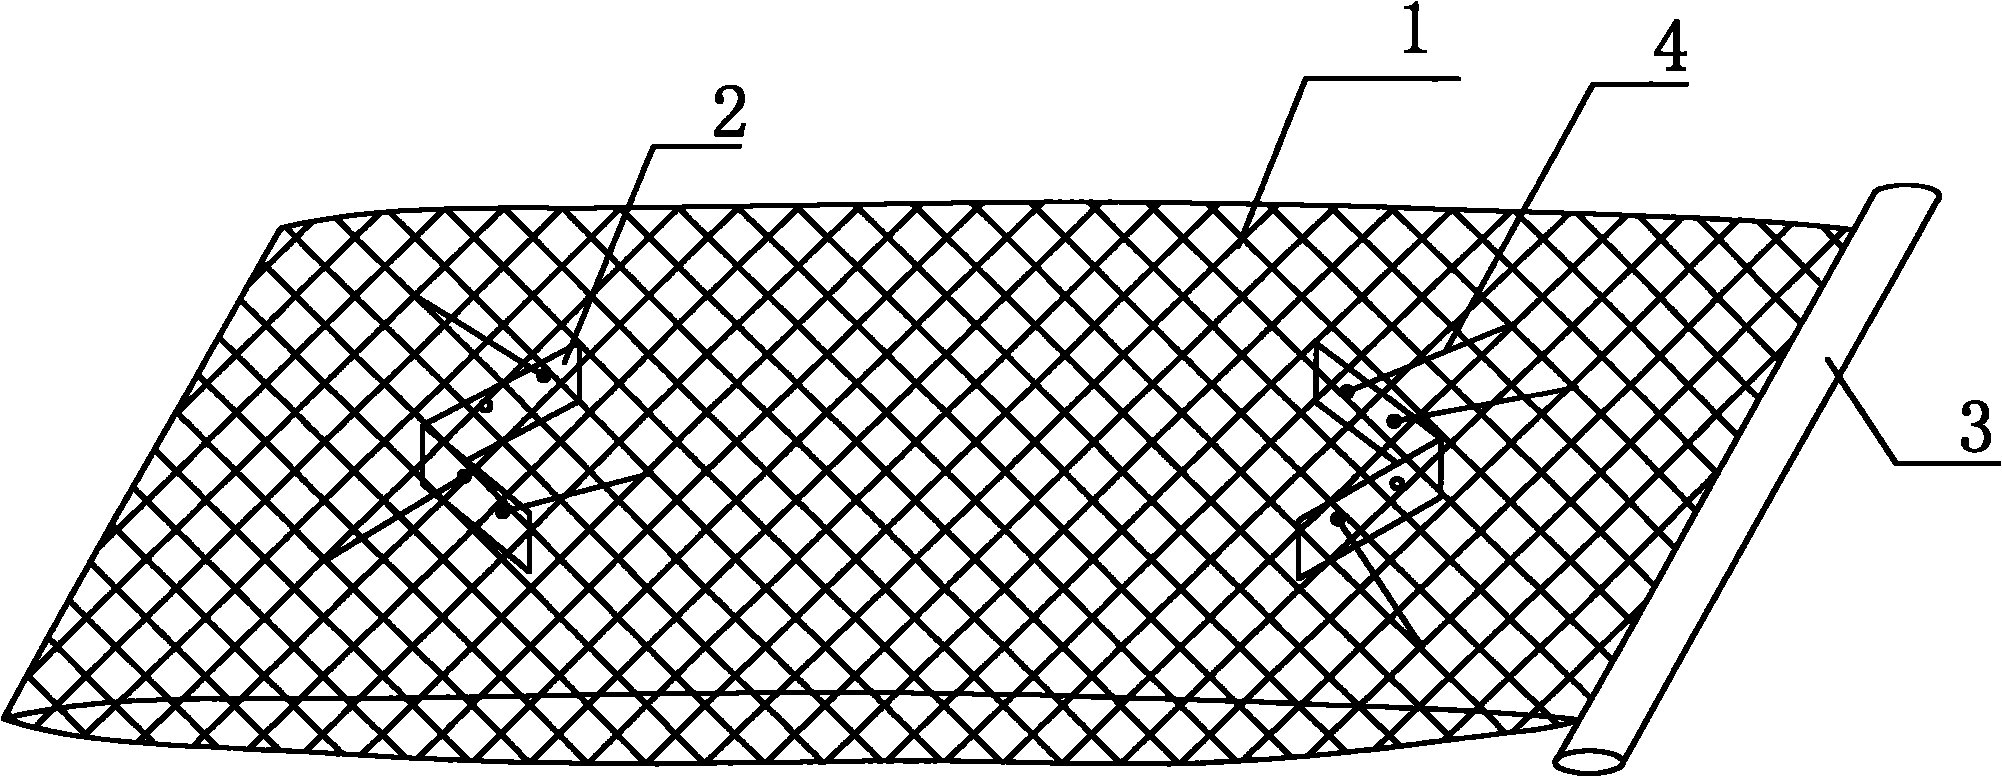 Seabed cage-breeding device for comb shells